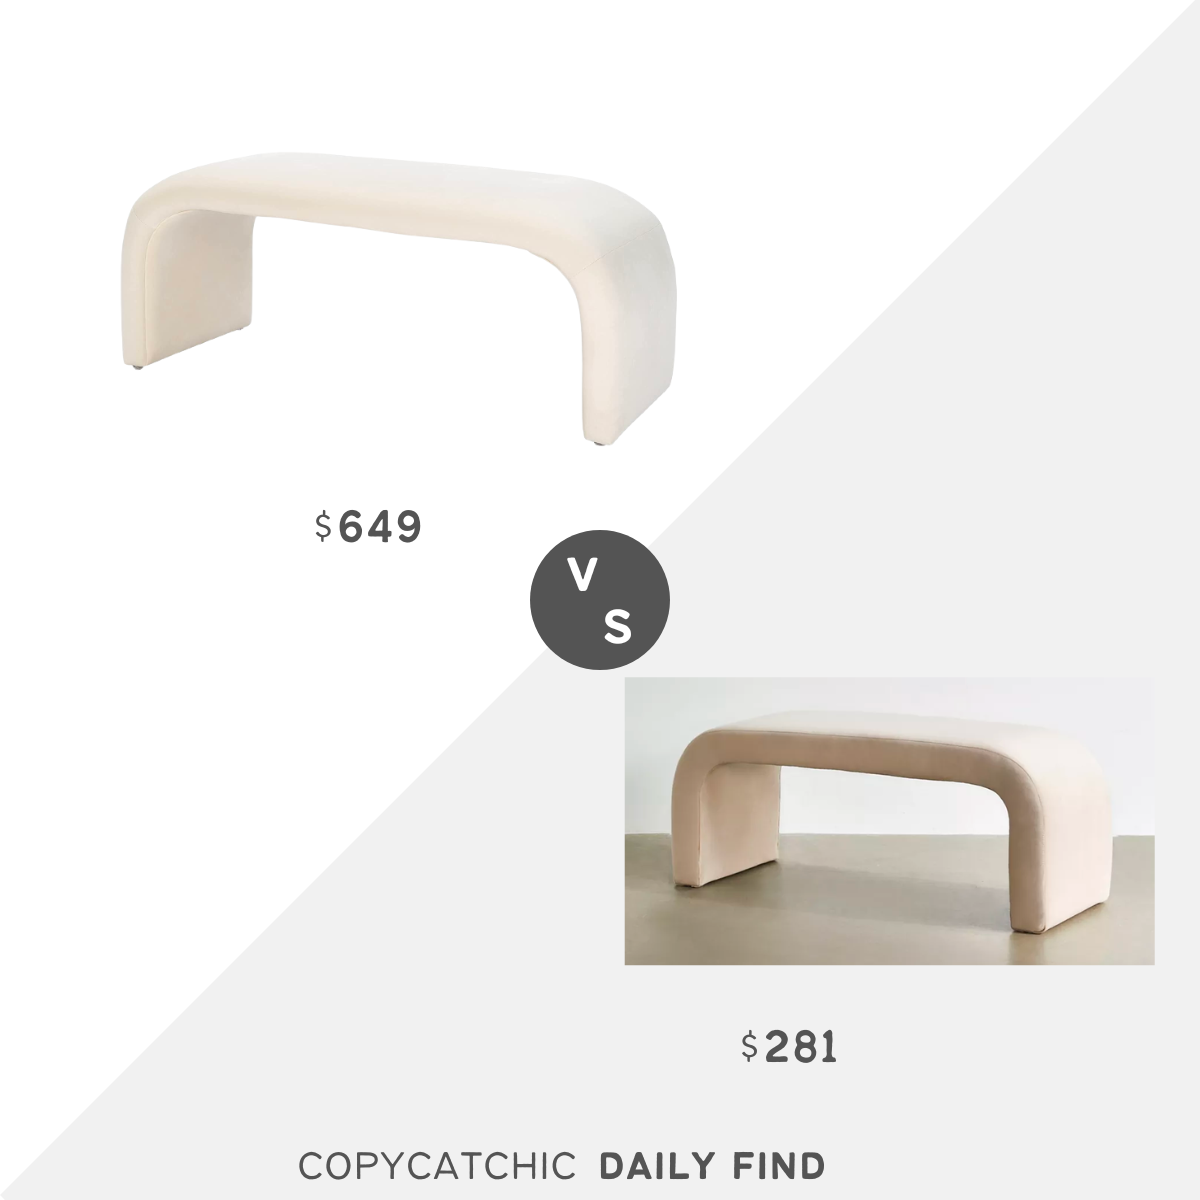 Find Sienna Urban Daily copycatchic Waterfall - | Bench Outfitters